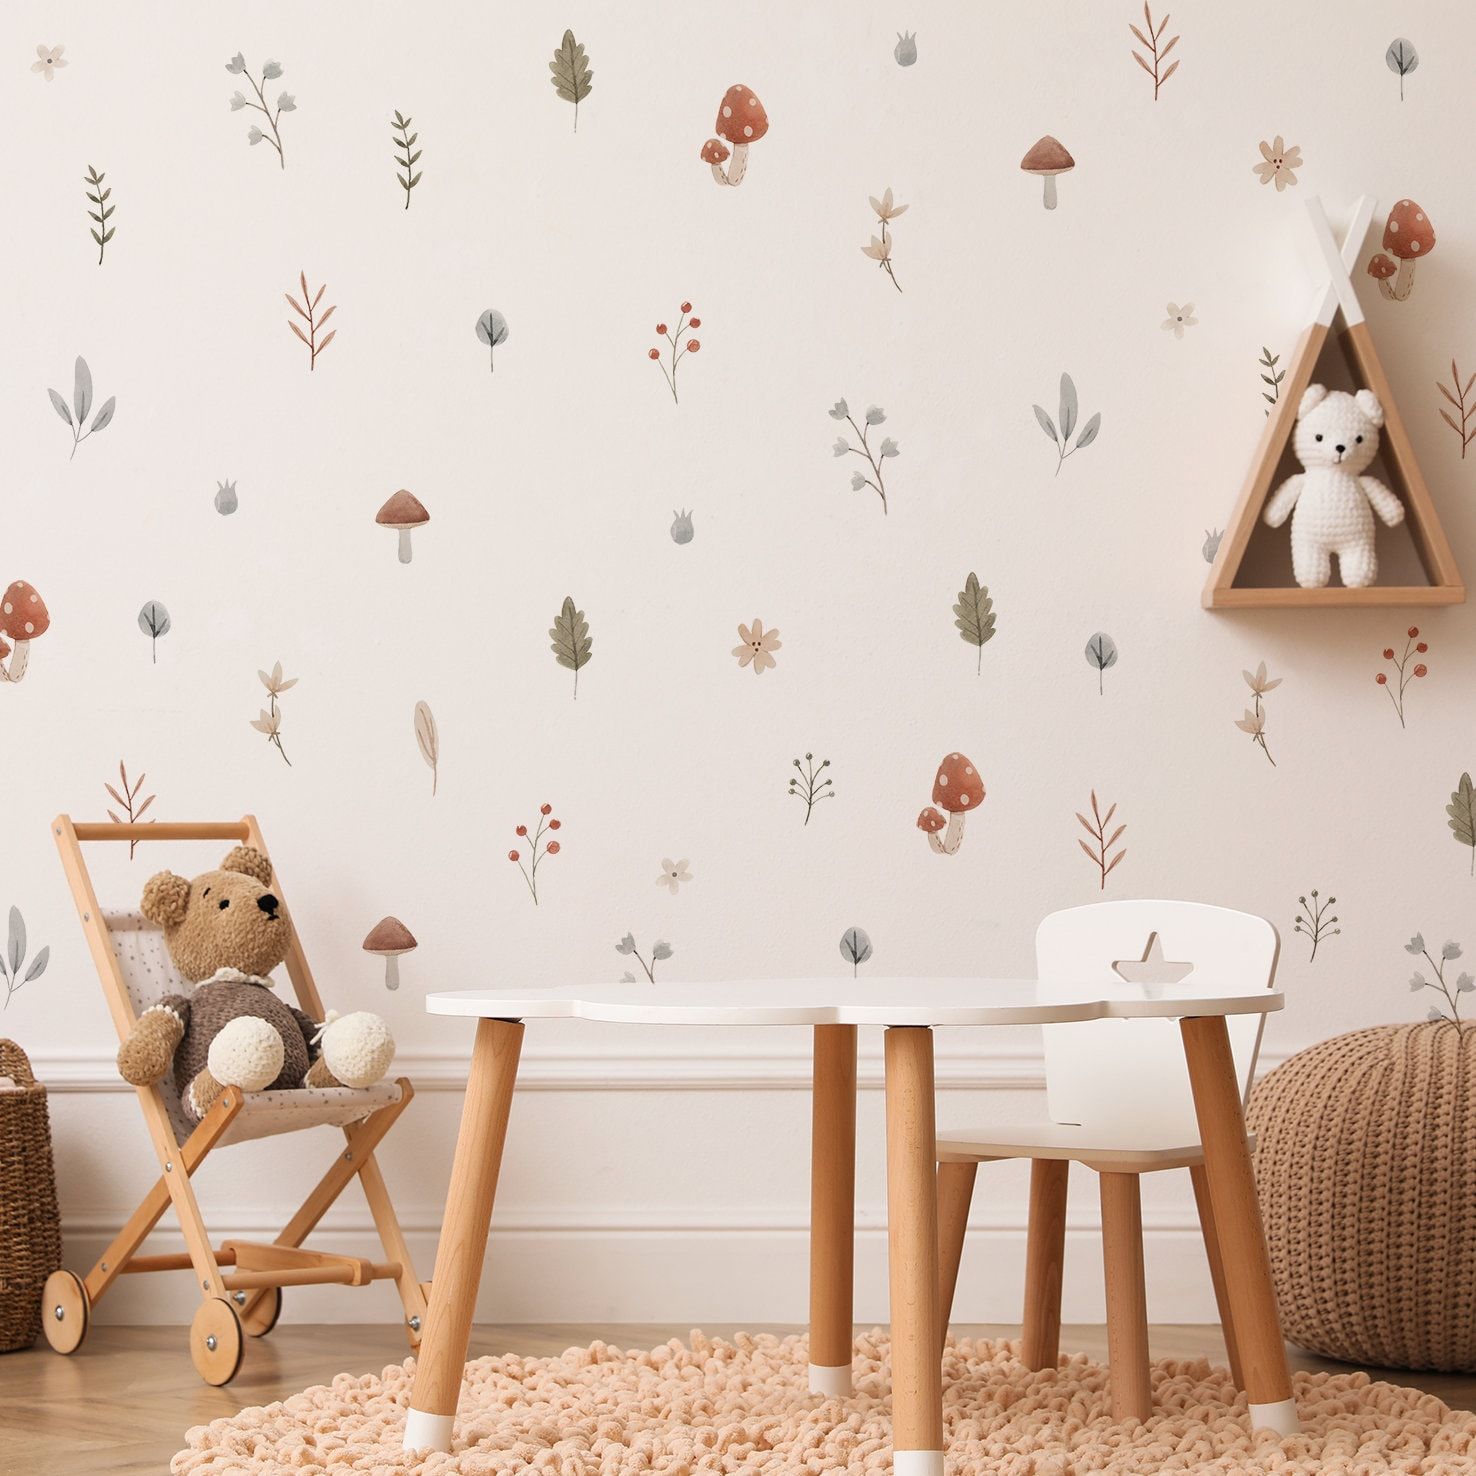 Decorate your room with attractive tree
wall decals